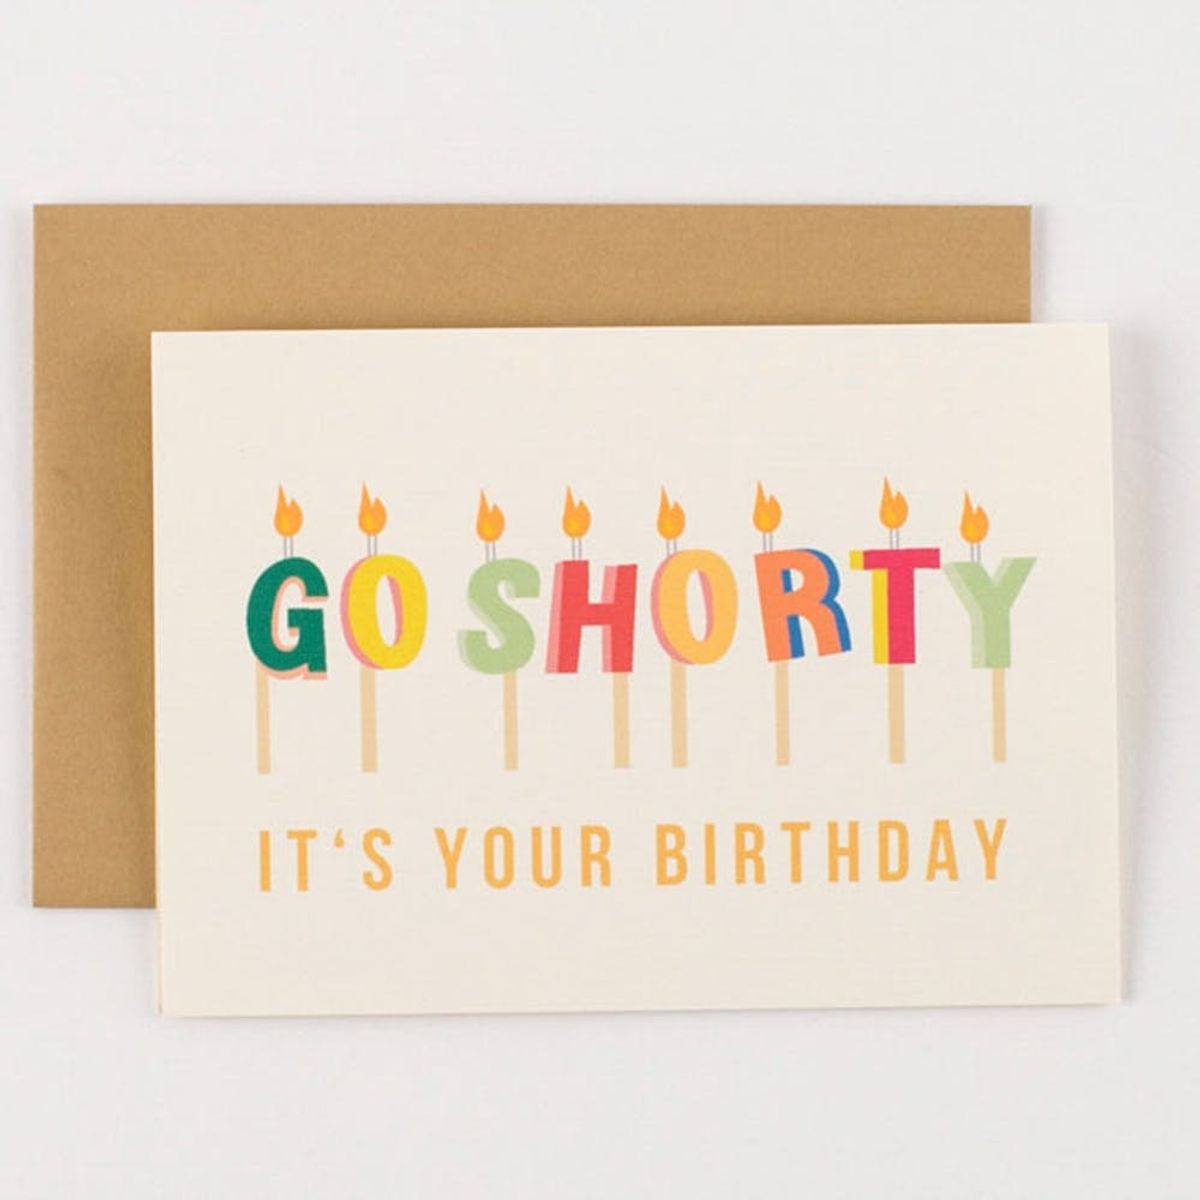 These Punny Cards Are Guaranteed to Make You Smile